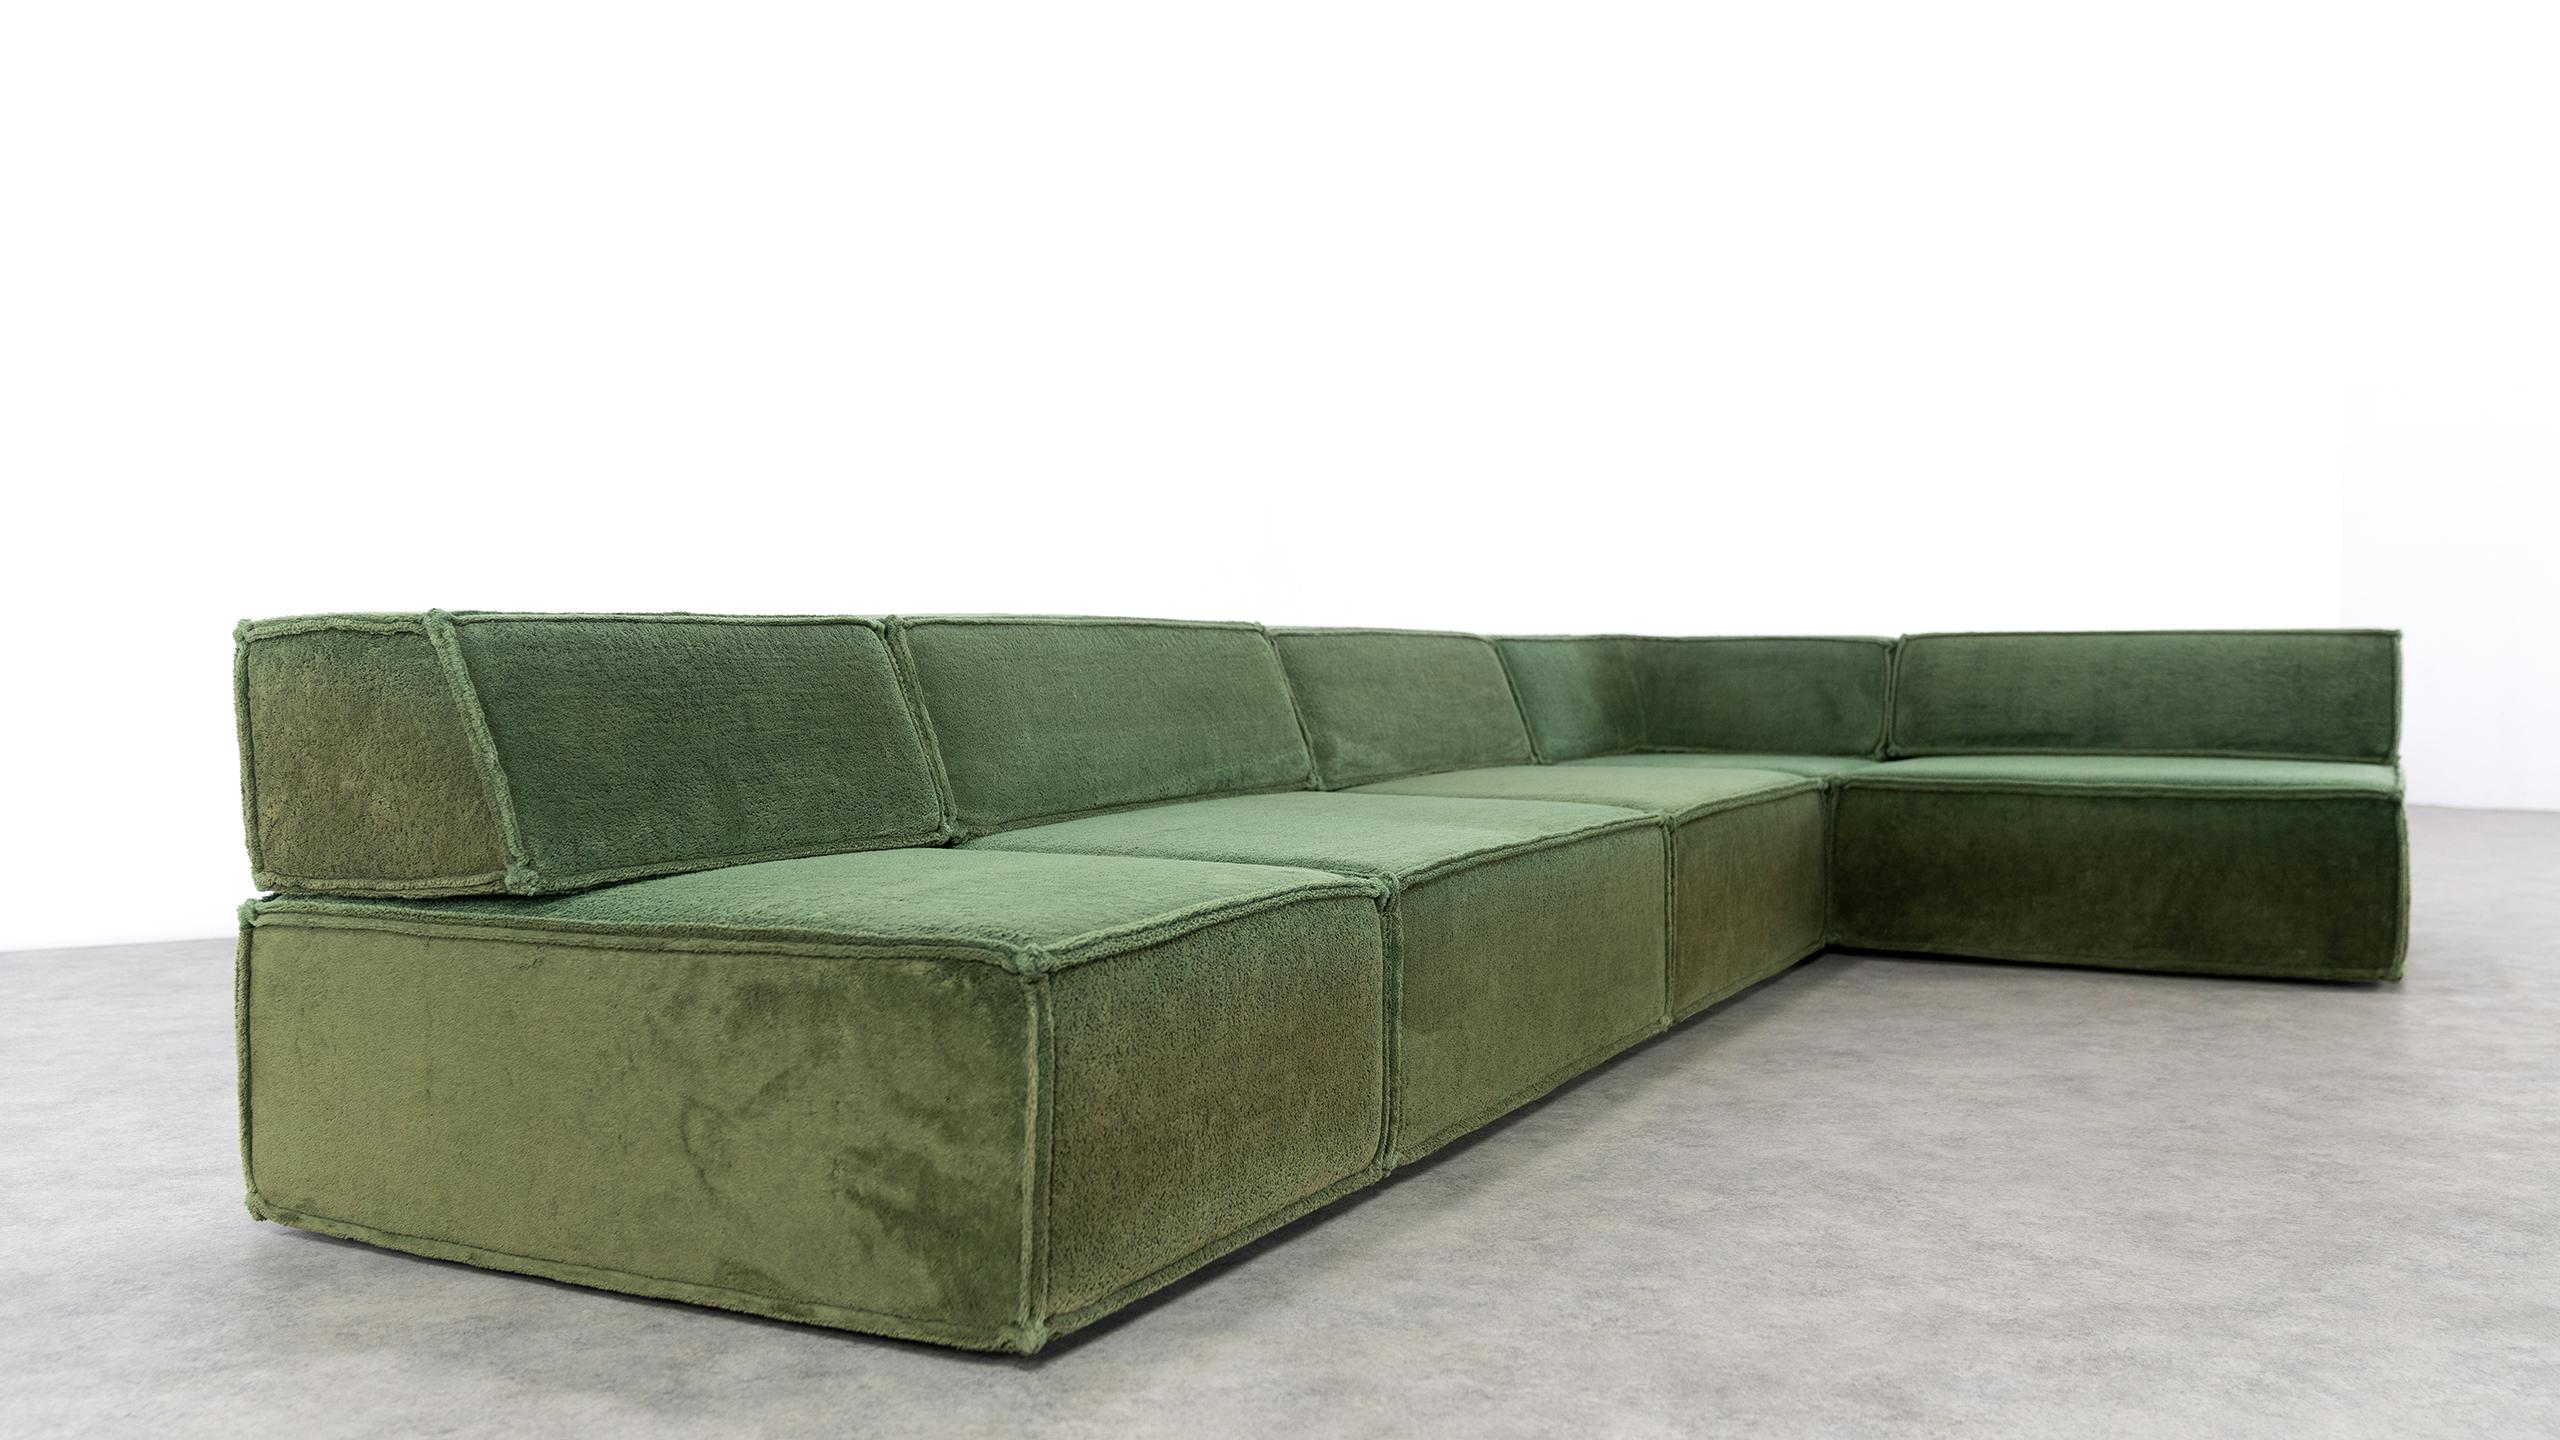 COR Trio Modular Sofa, Giant Landscape in Green, 1972 by Team Form AG, Swiss 11